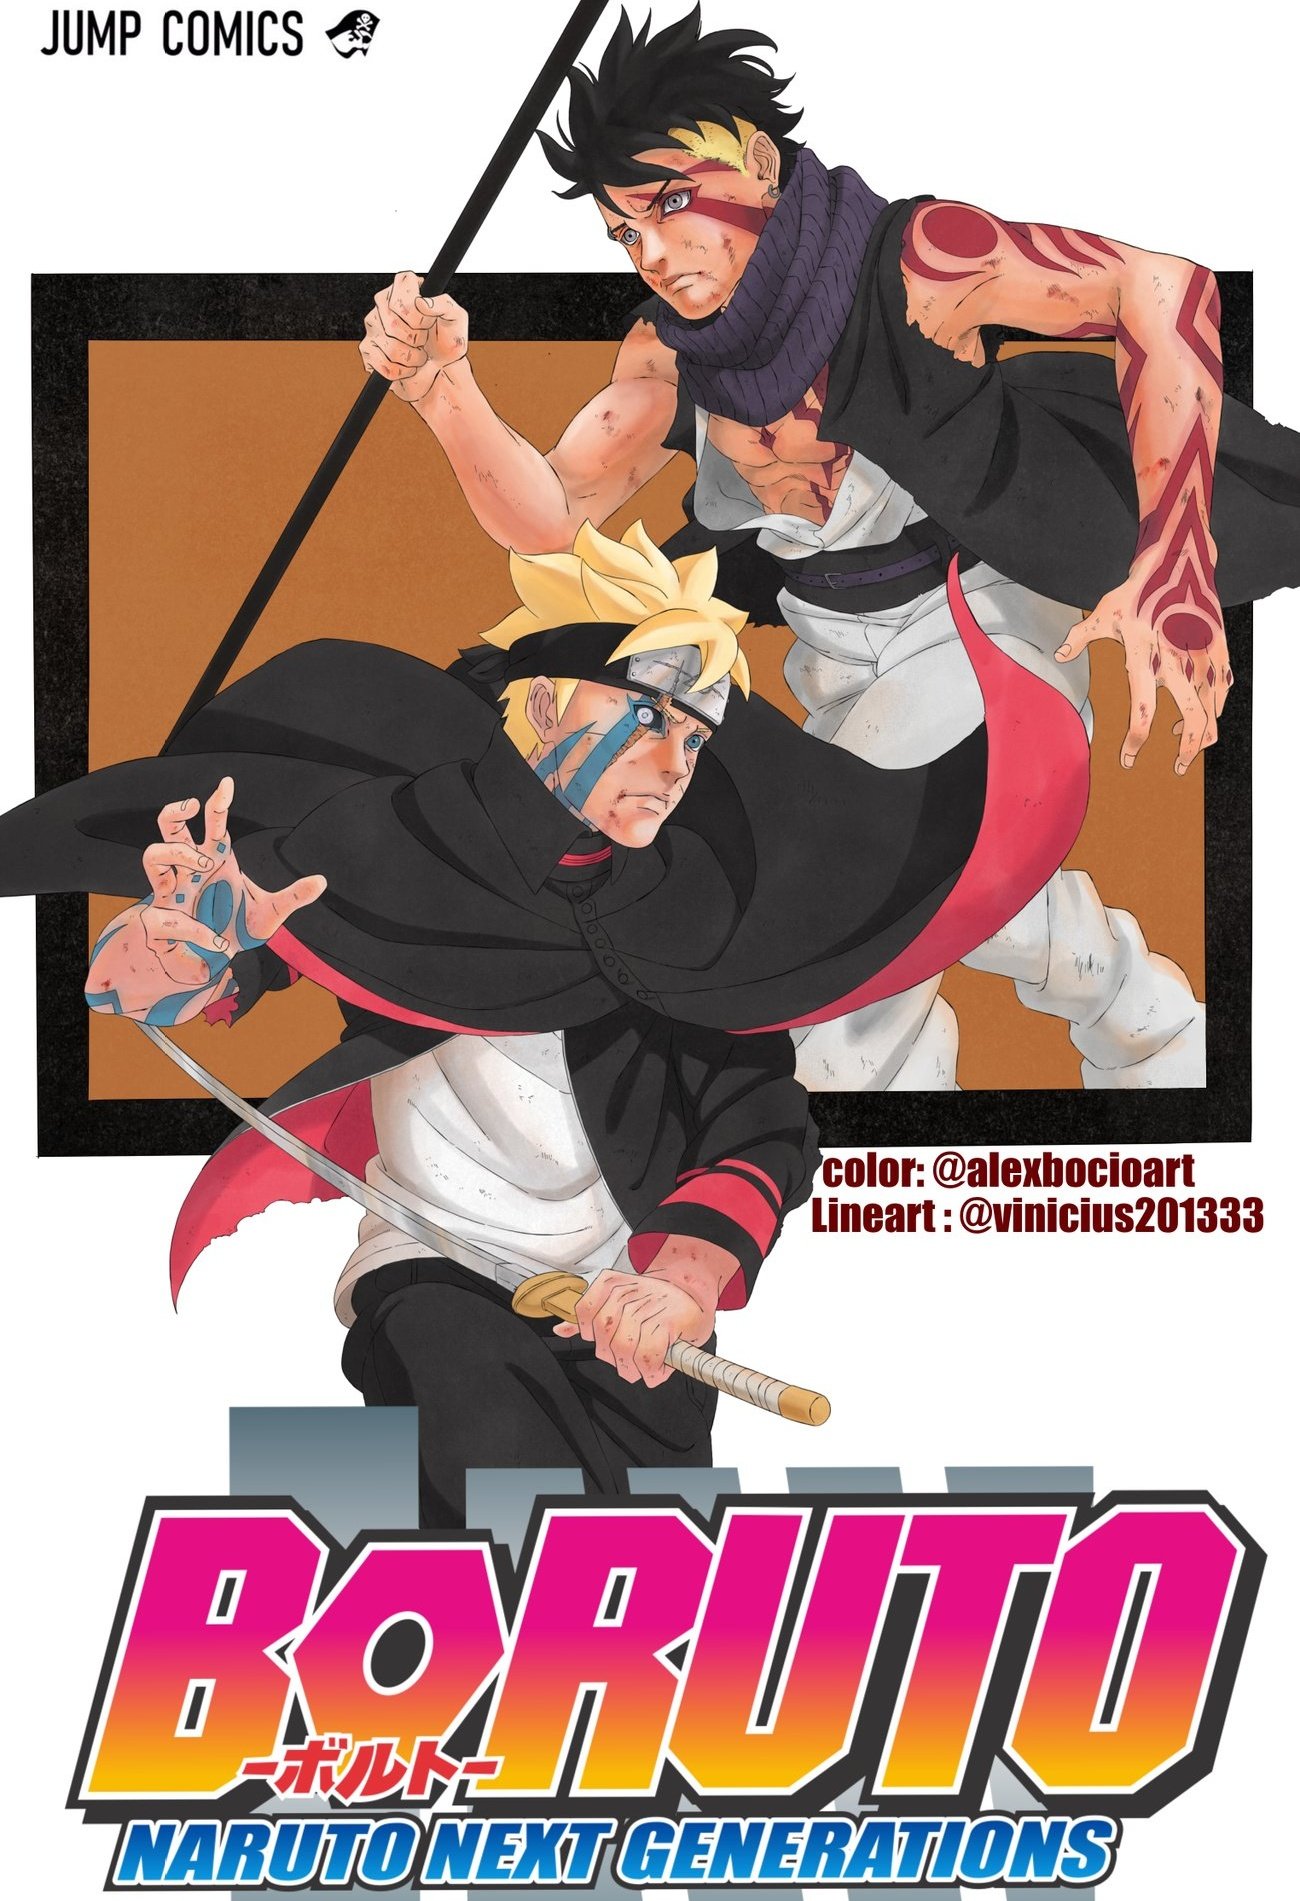 Boruto chapter 81: Release date, where to read, and more